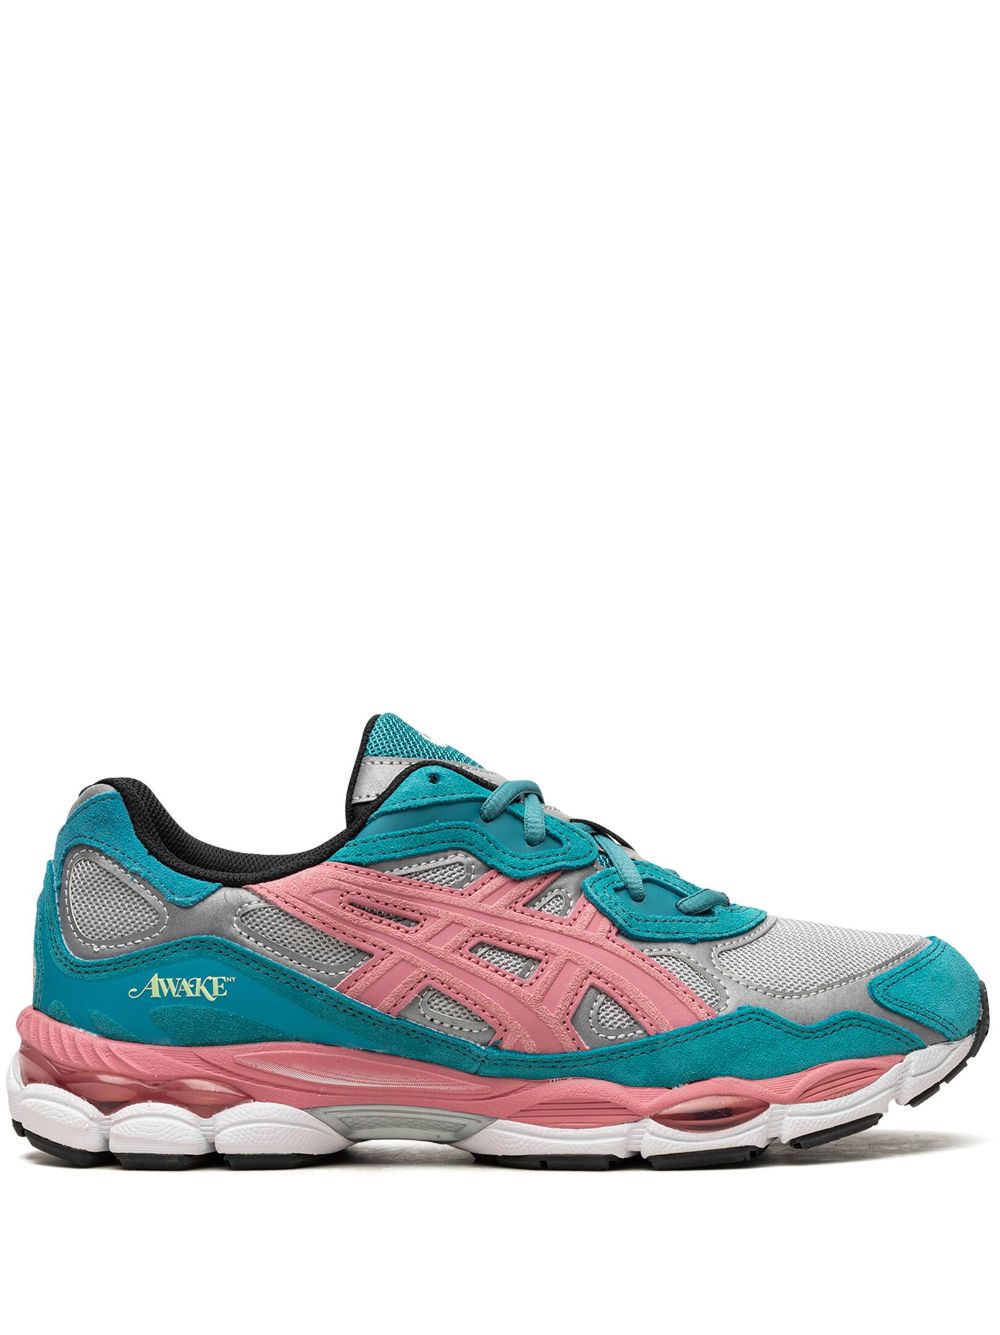 Asics X Awake Ny Gel-nyc "teal" Sneakers In Blue